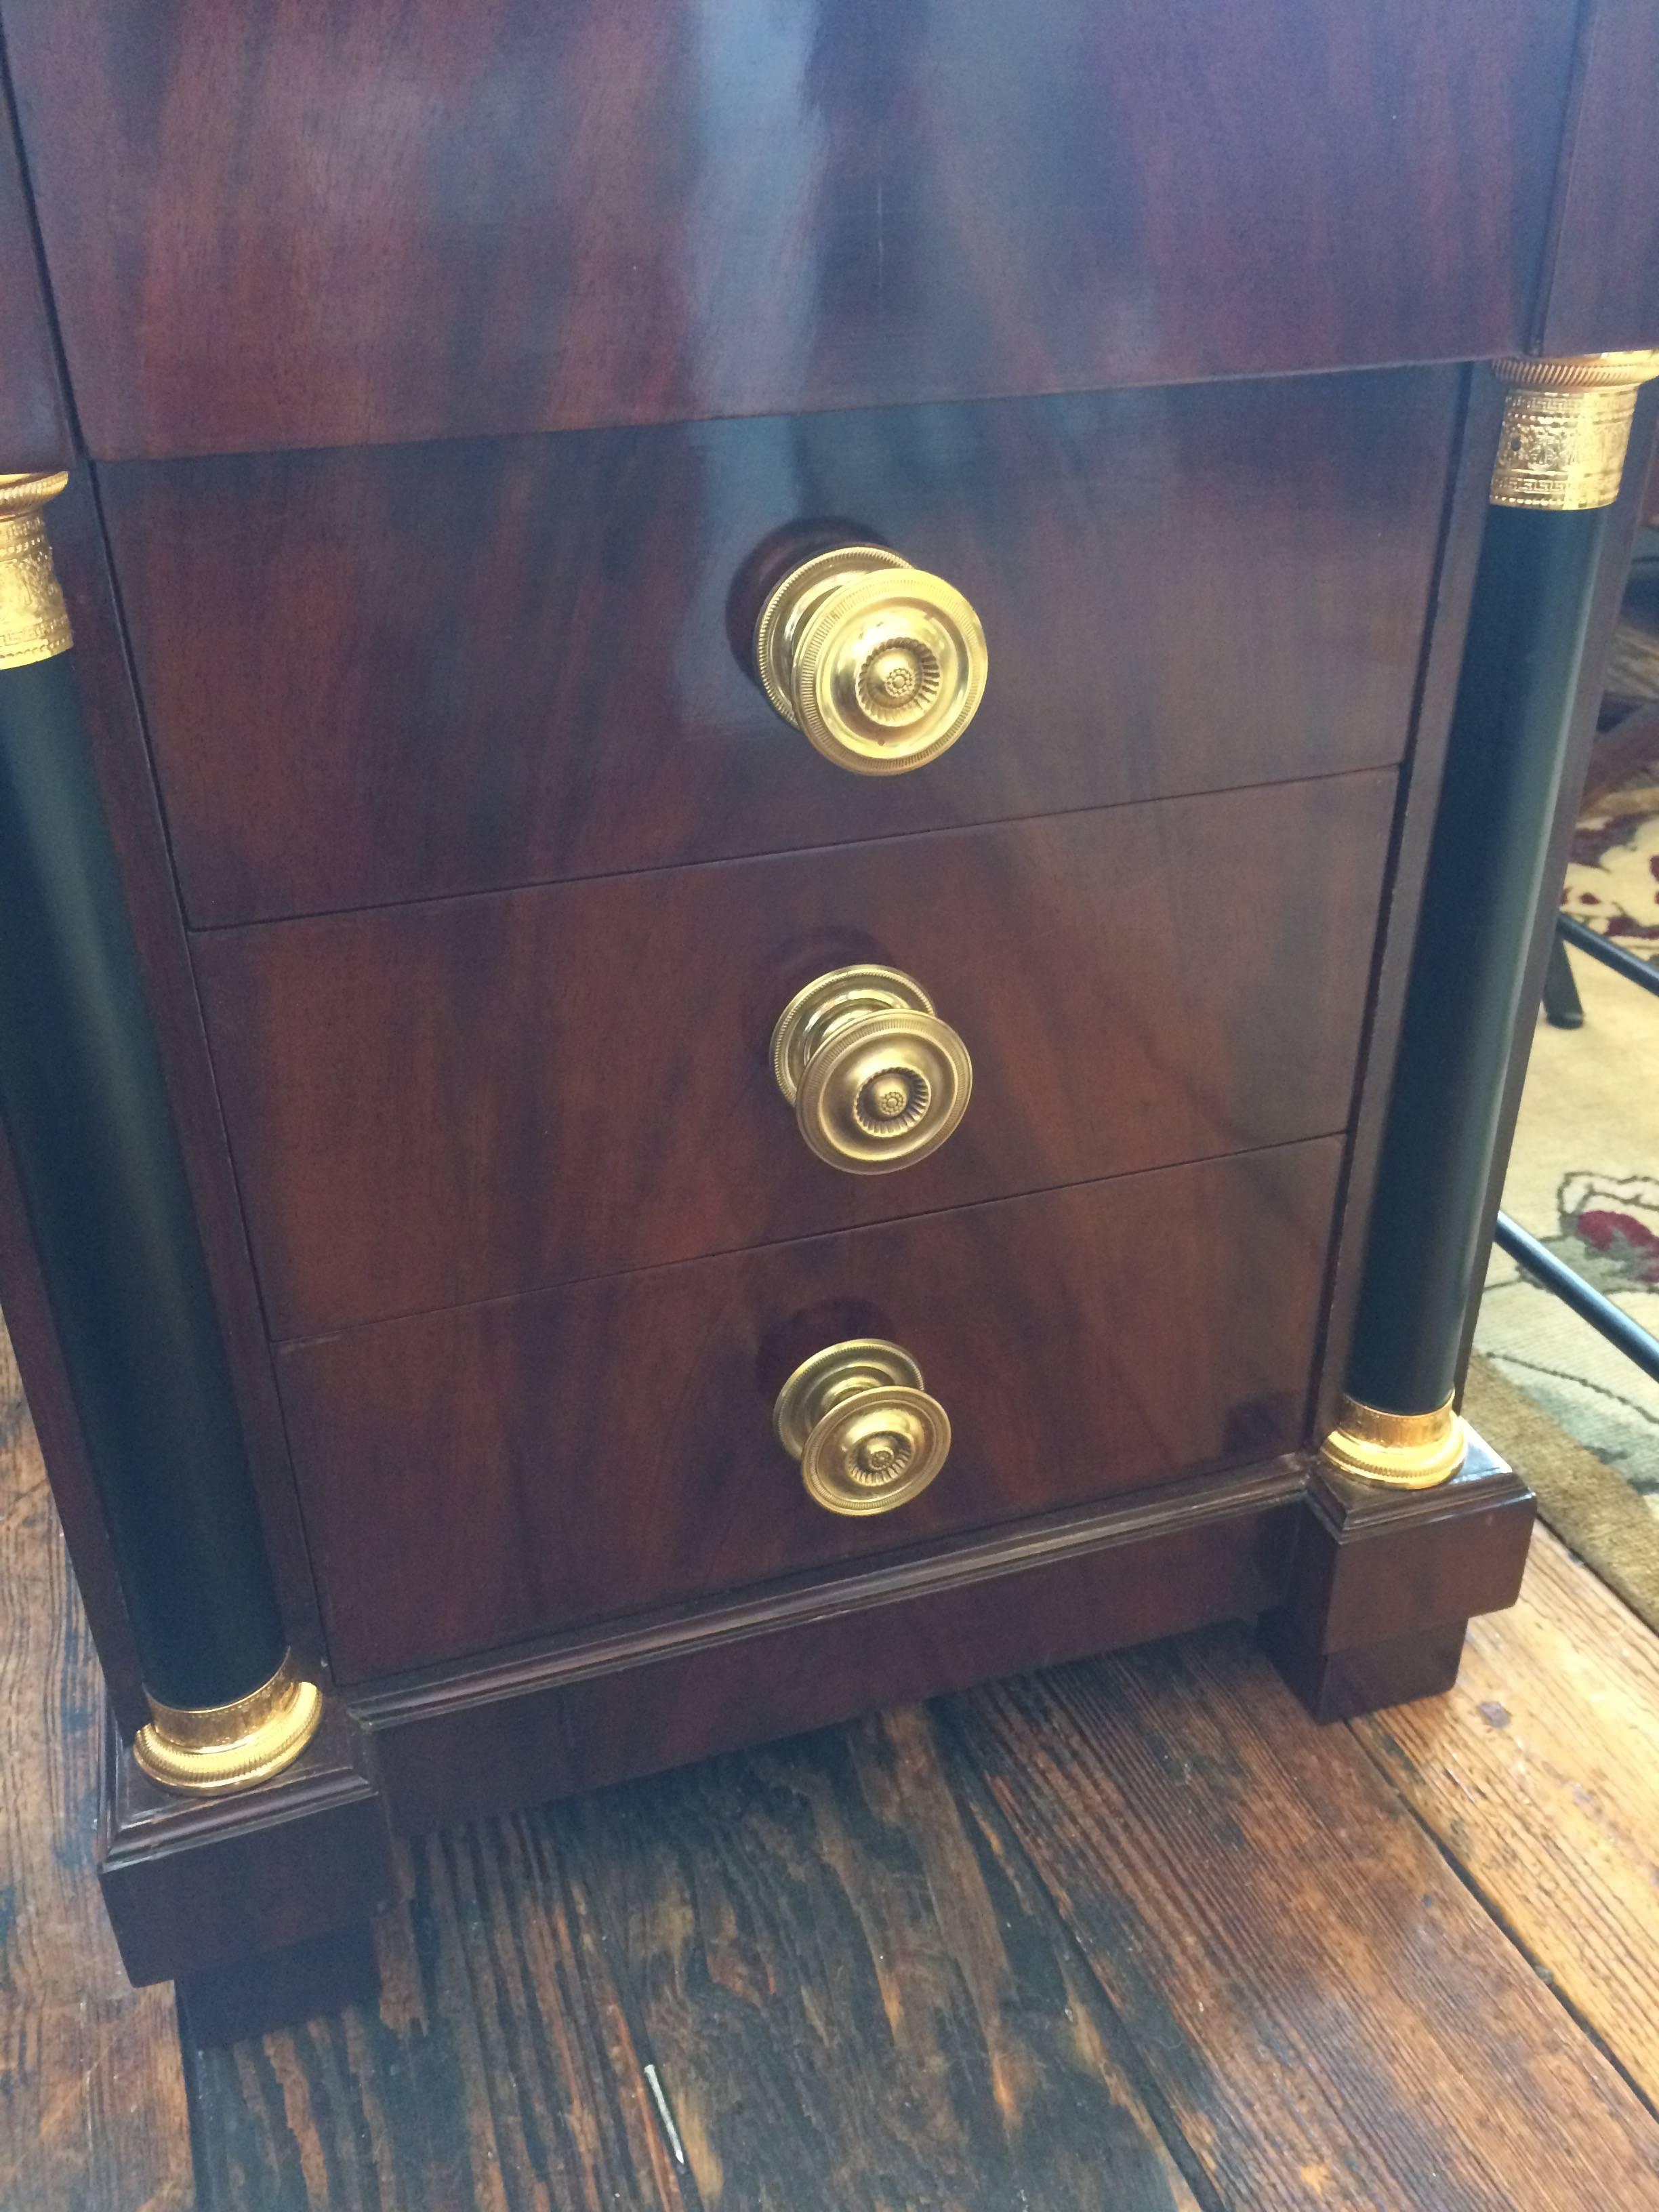 Handsome pair of mahogany nightstands or small bachelor chests having four drawers, the top drawer recessed so without a knob, brass hardware and details, ebonized columns on the fascade, and white marble tops.